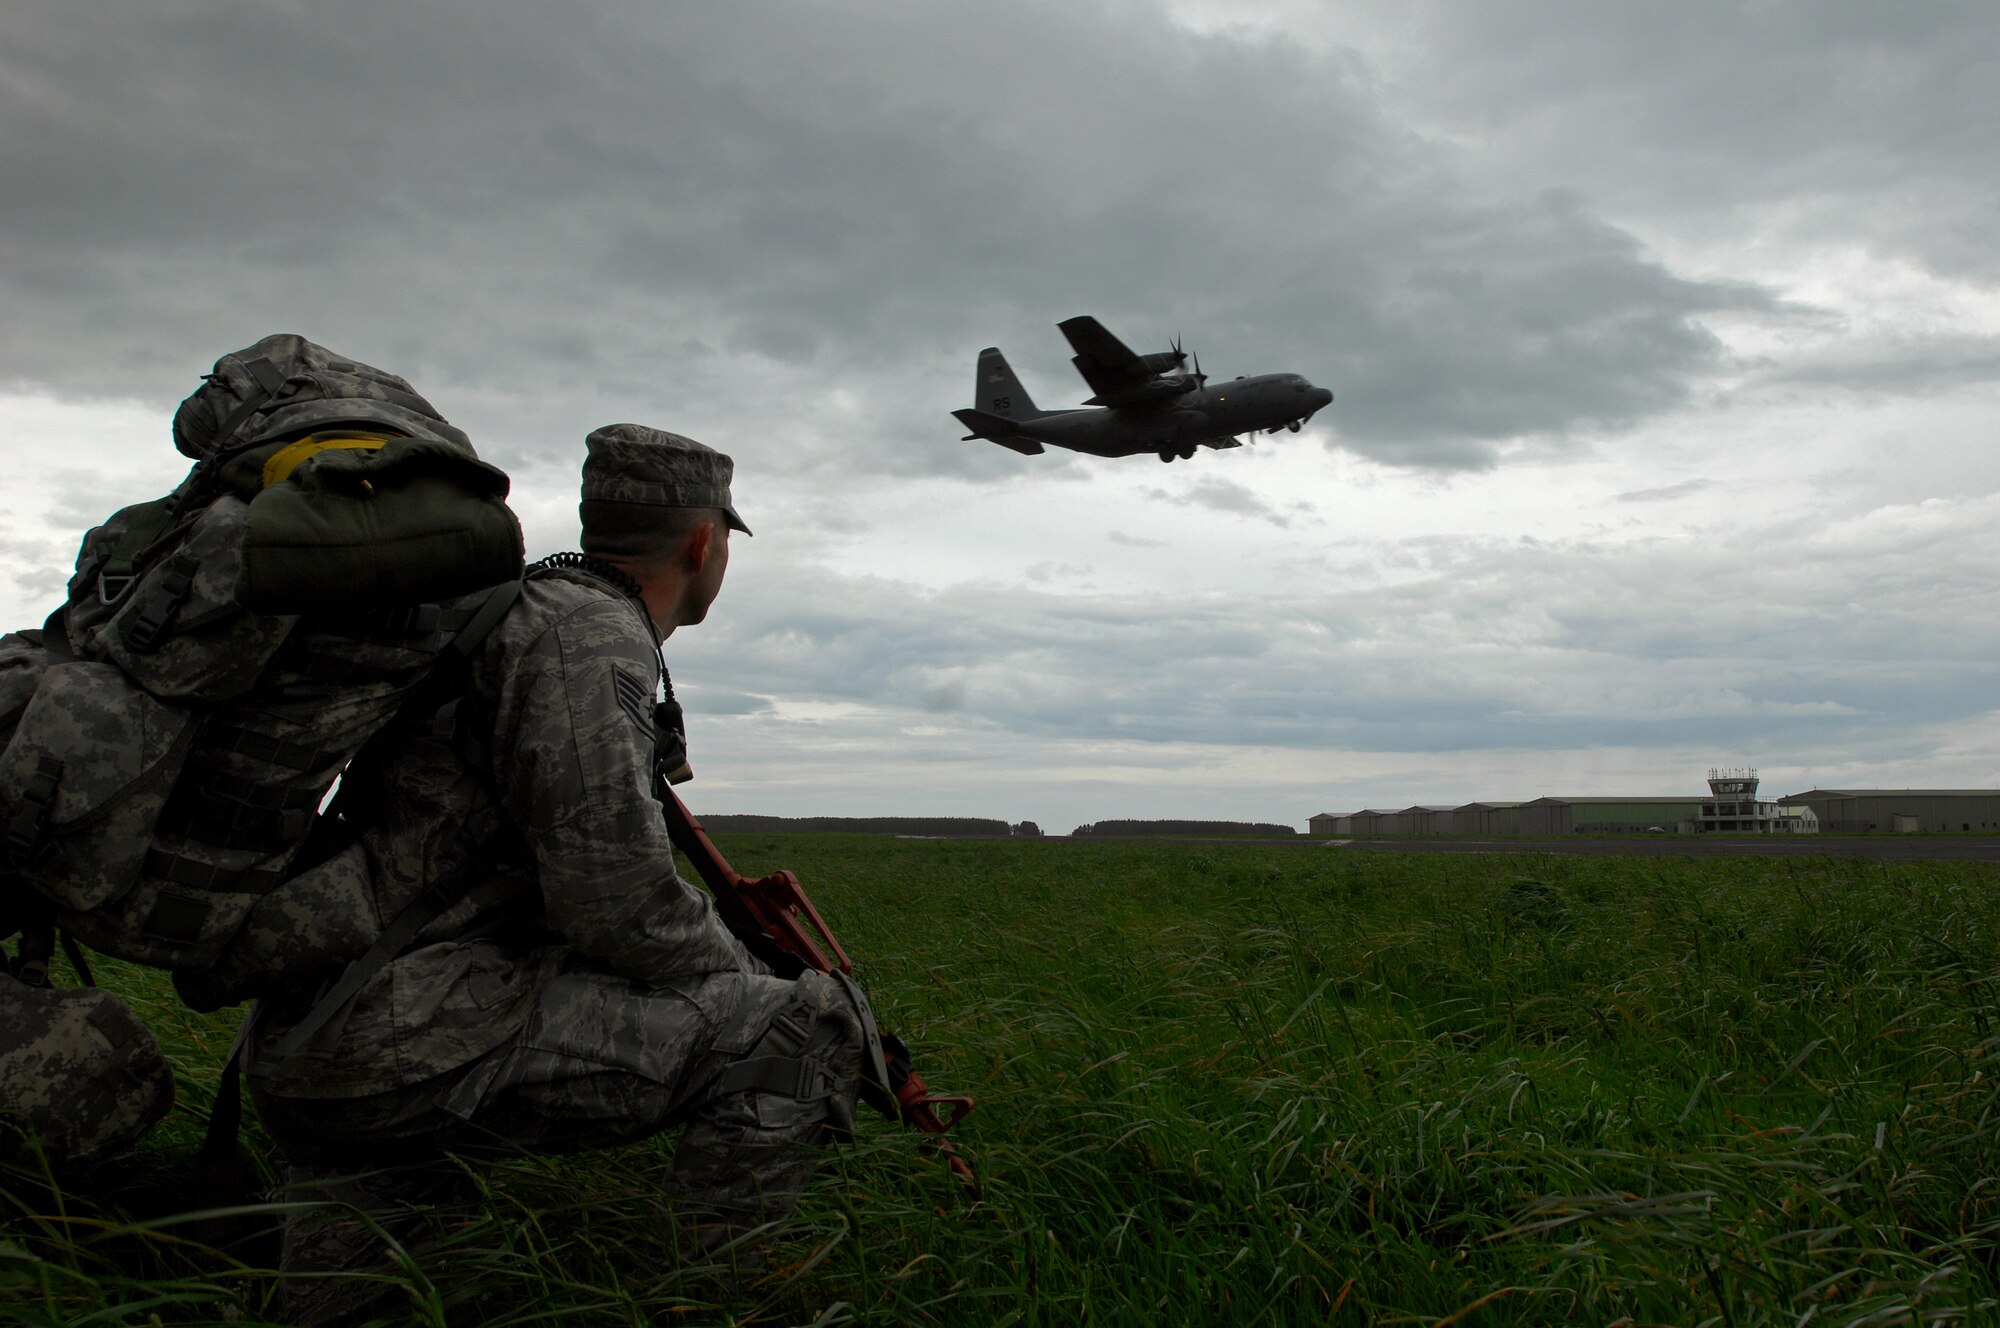 United States Air Force Staff Sgt Jason Schaffer, 786th Security Forces Squadron Paratrooper takes a knee as a C-130 Hercules flies overhead after departing West Freugh Airfield, Scotland during an Operational Readiness Exercise, May 18, 2009. (U.S. Air Force photo by Senior Airman Kenny Holston)